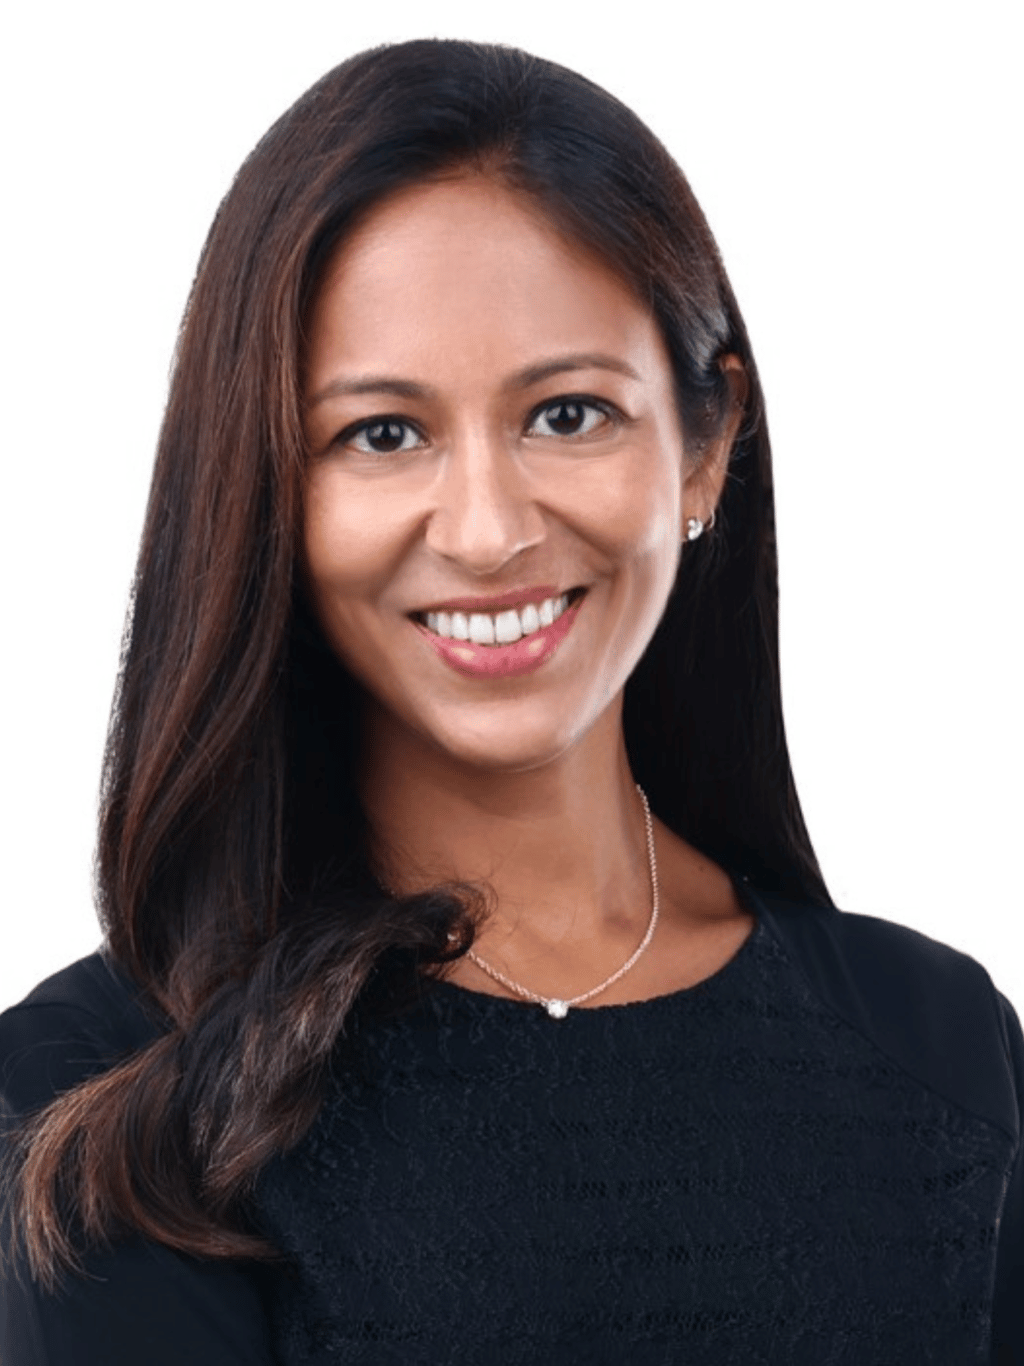 Dr. Tasneem Rangwala is an American board-certified Orthodontist with over 10 years of clinical experience.